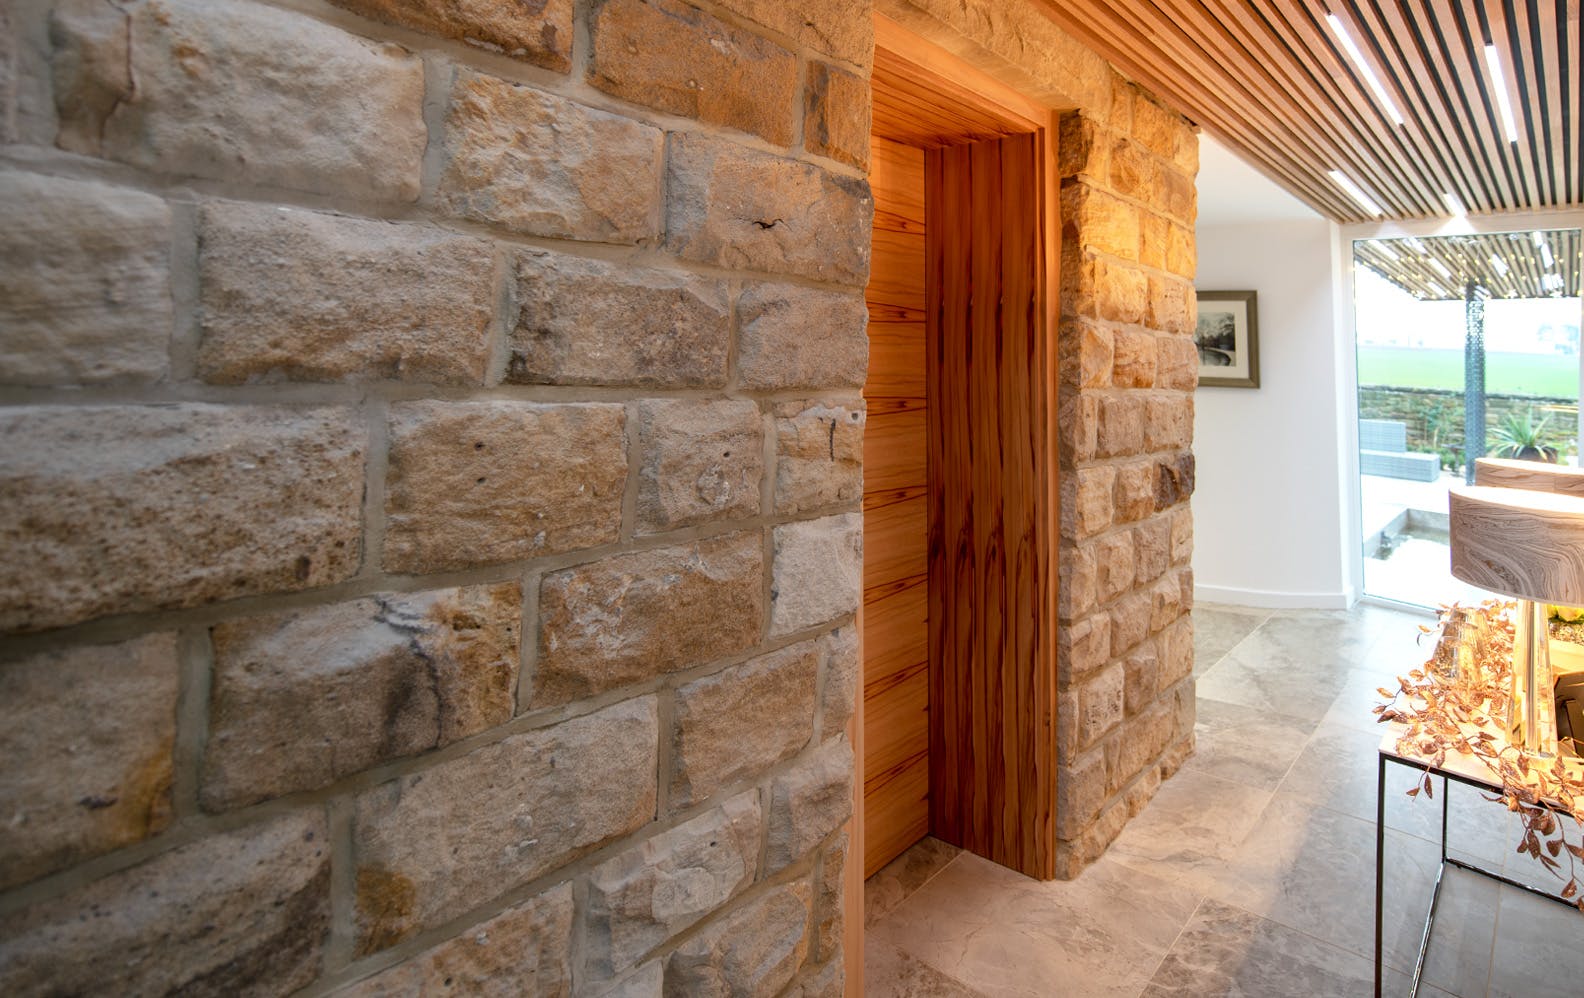 A contemporary meets Yorkshire stone hallway, featuring made-to-measure internal door set with extra deep frames demonstrates Deuren's made-to-measure door set capabilities perfect for period properties.